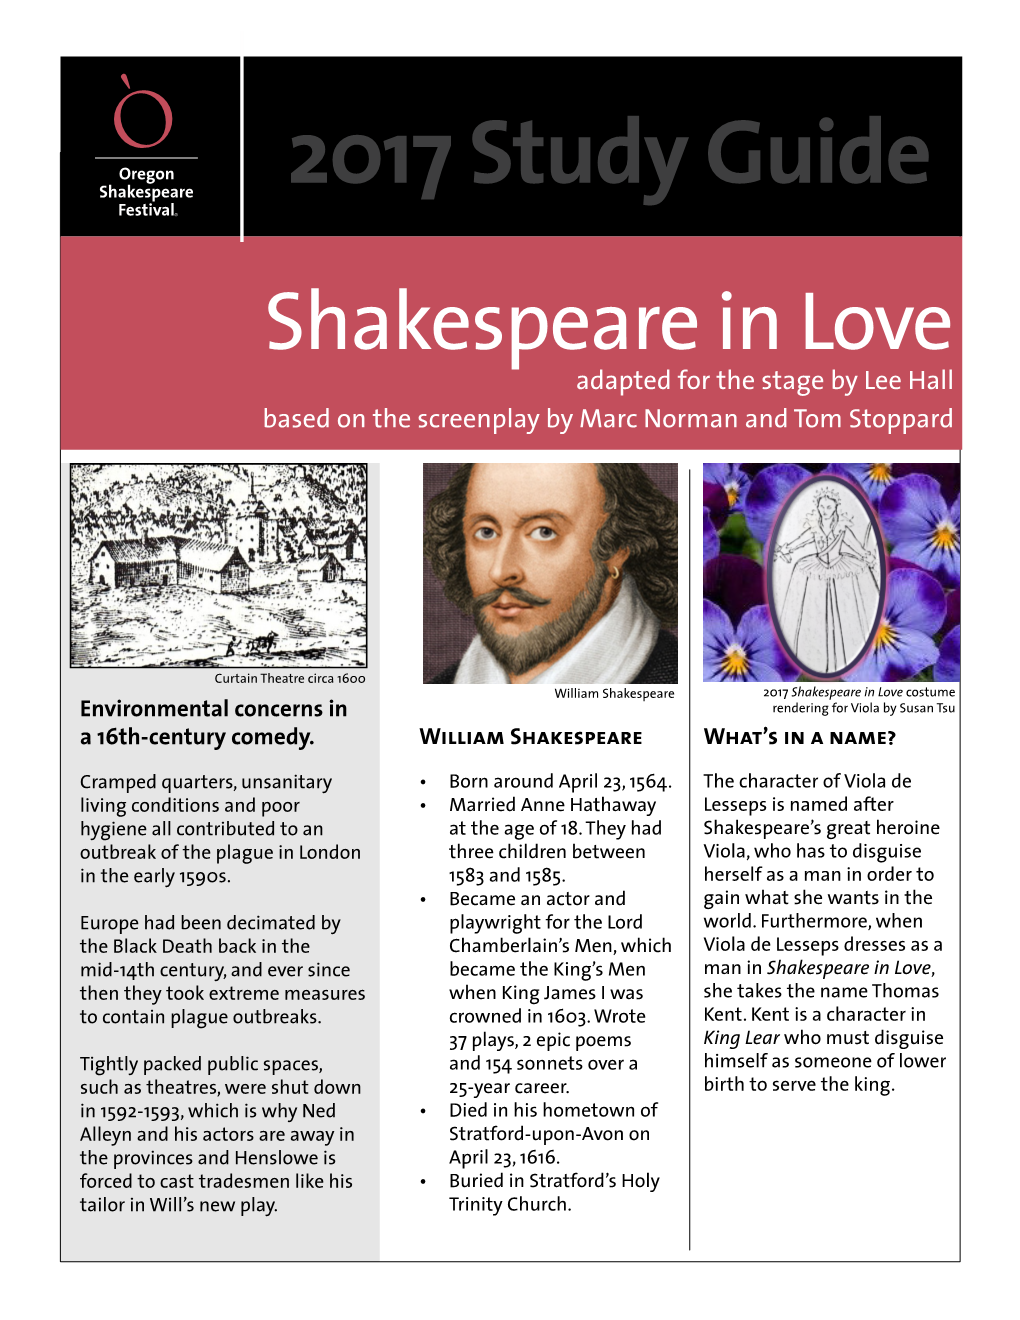 2017 Study Guide Shakespeare in Love Adapted for the Stage by Lee Hall Based on the Screenplay by Marc Norman and Tom Stoppard